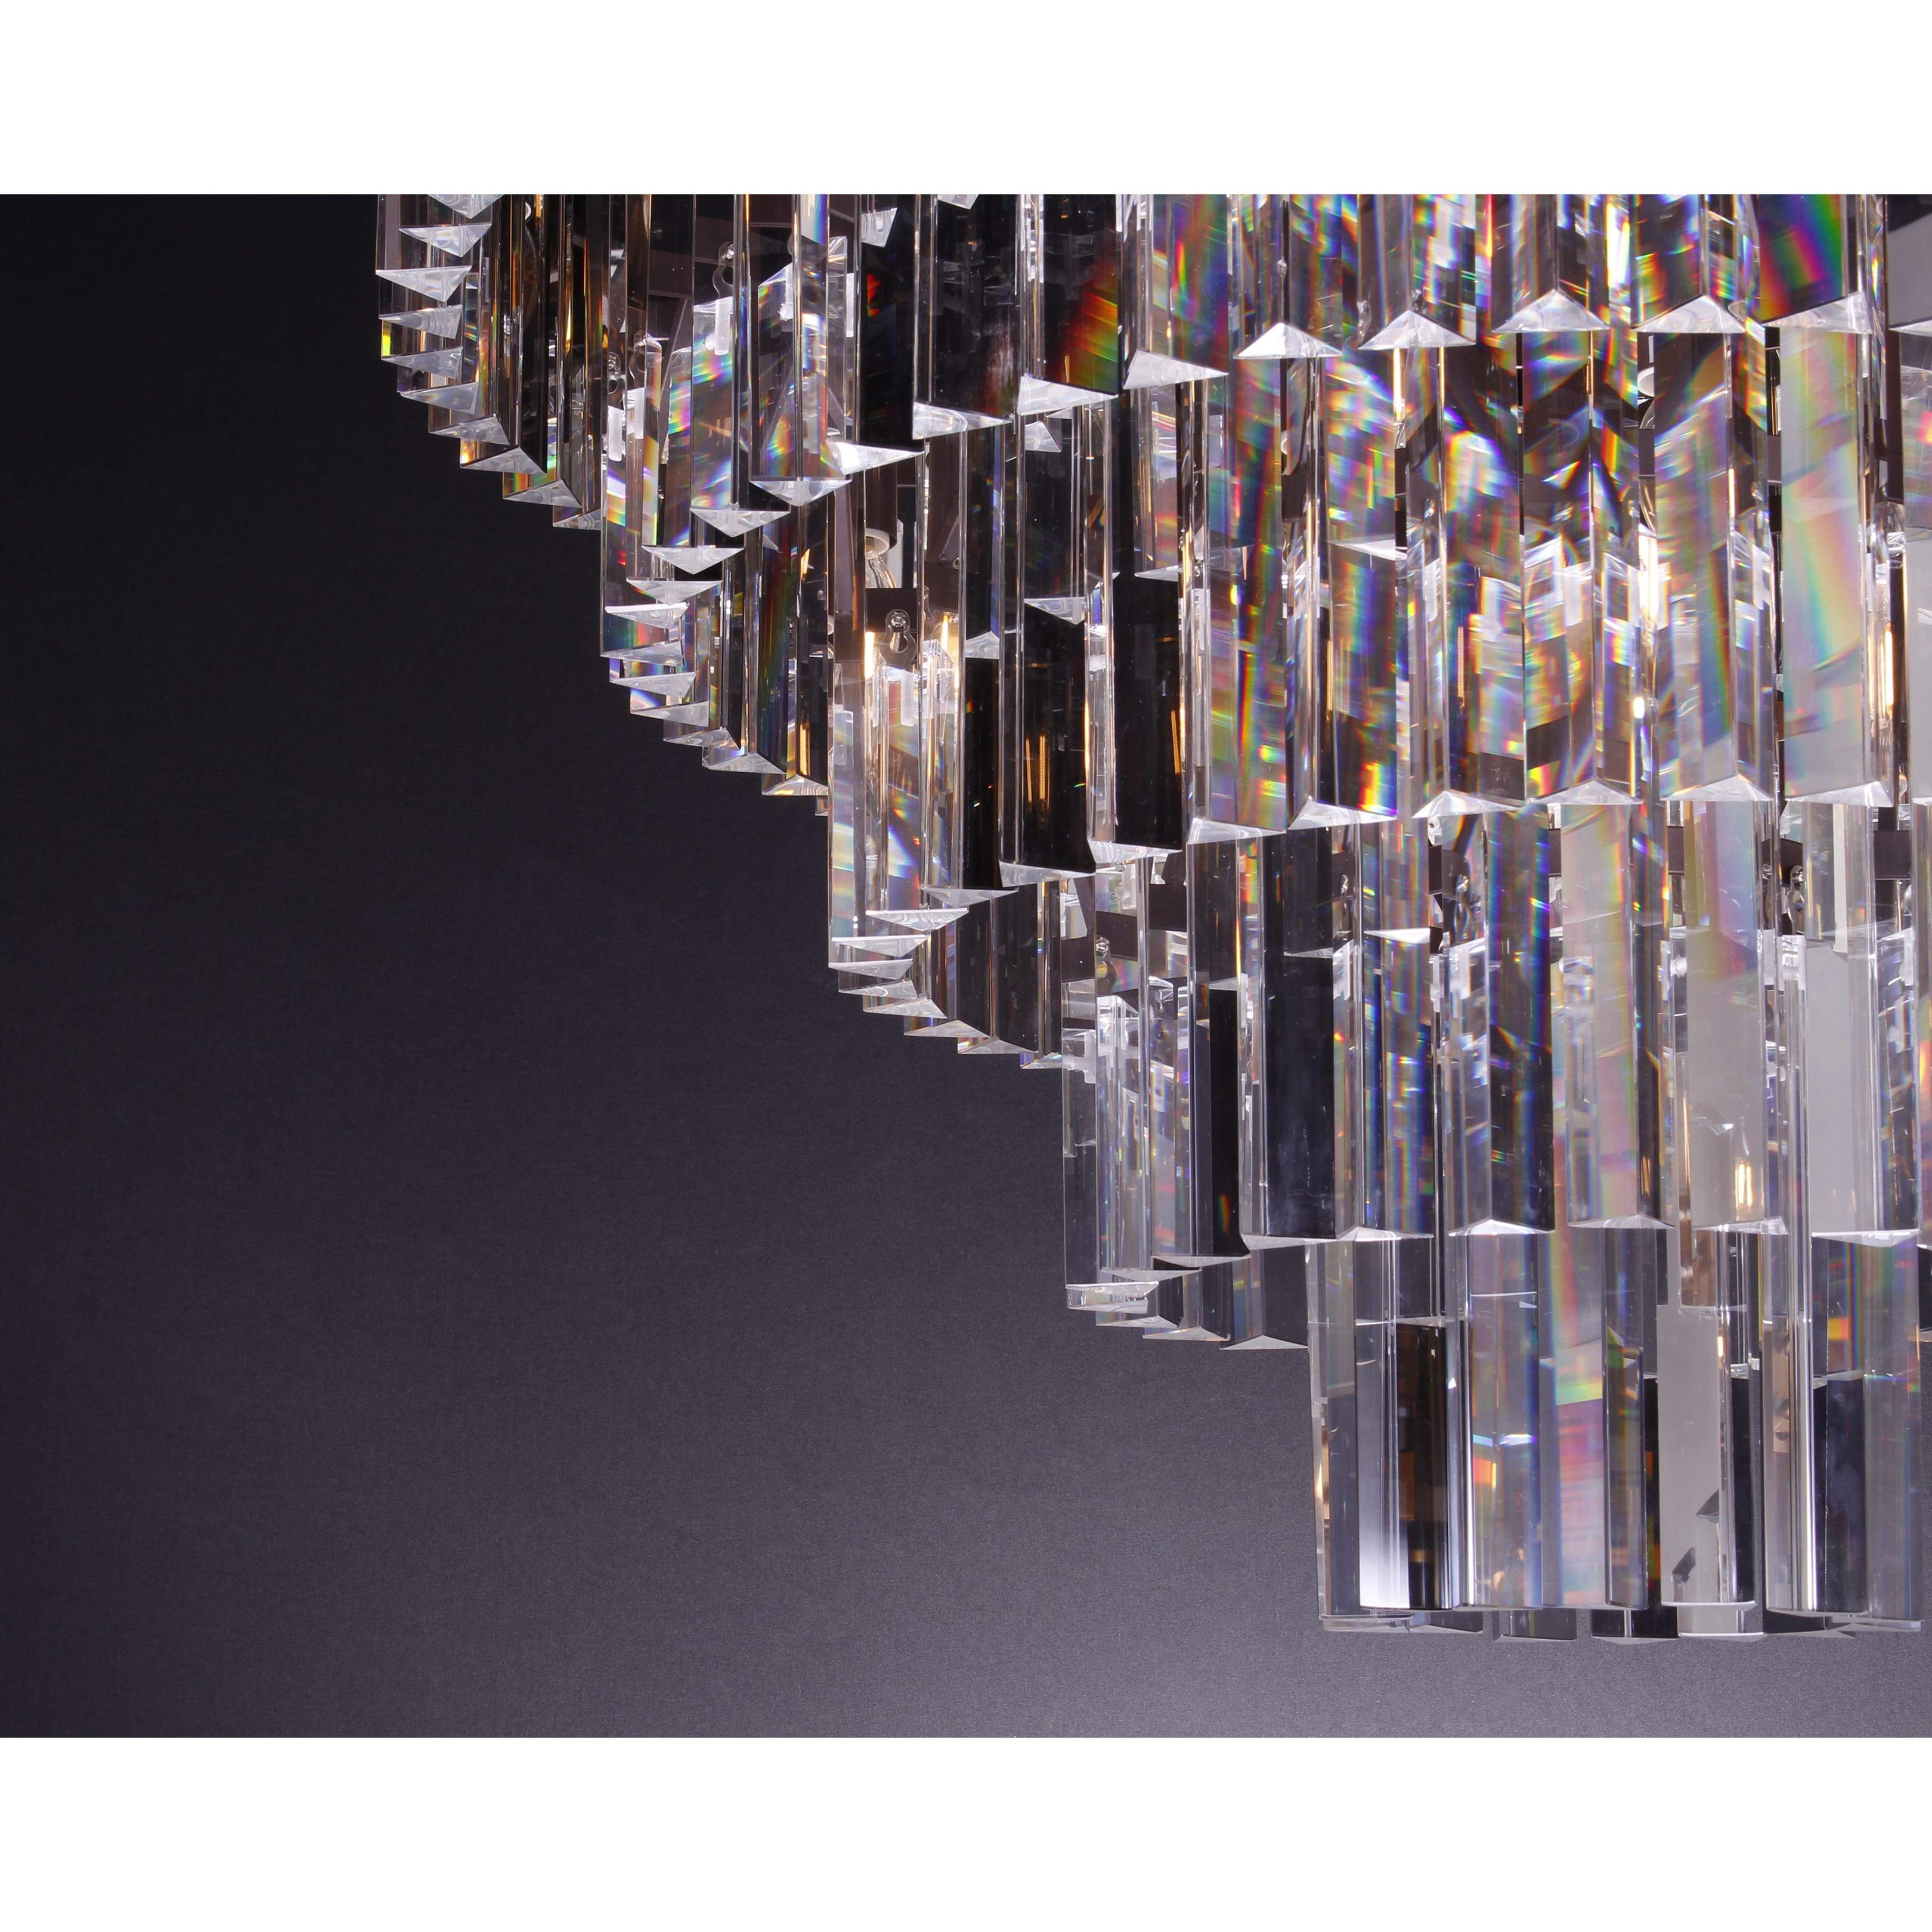 Apex Odeon Round Crystal Fringe Chandelier Collection - Italian Concept - 